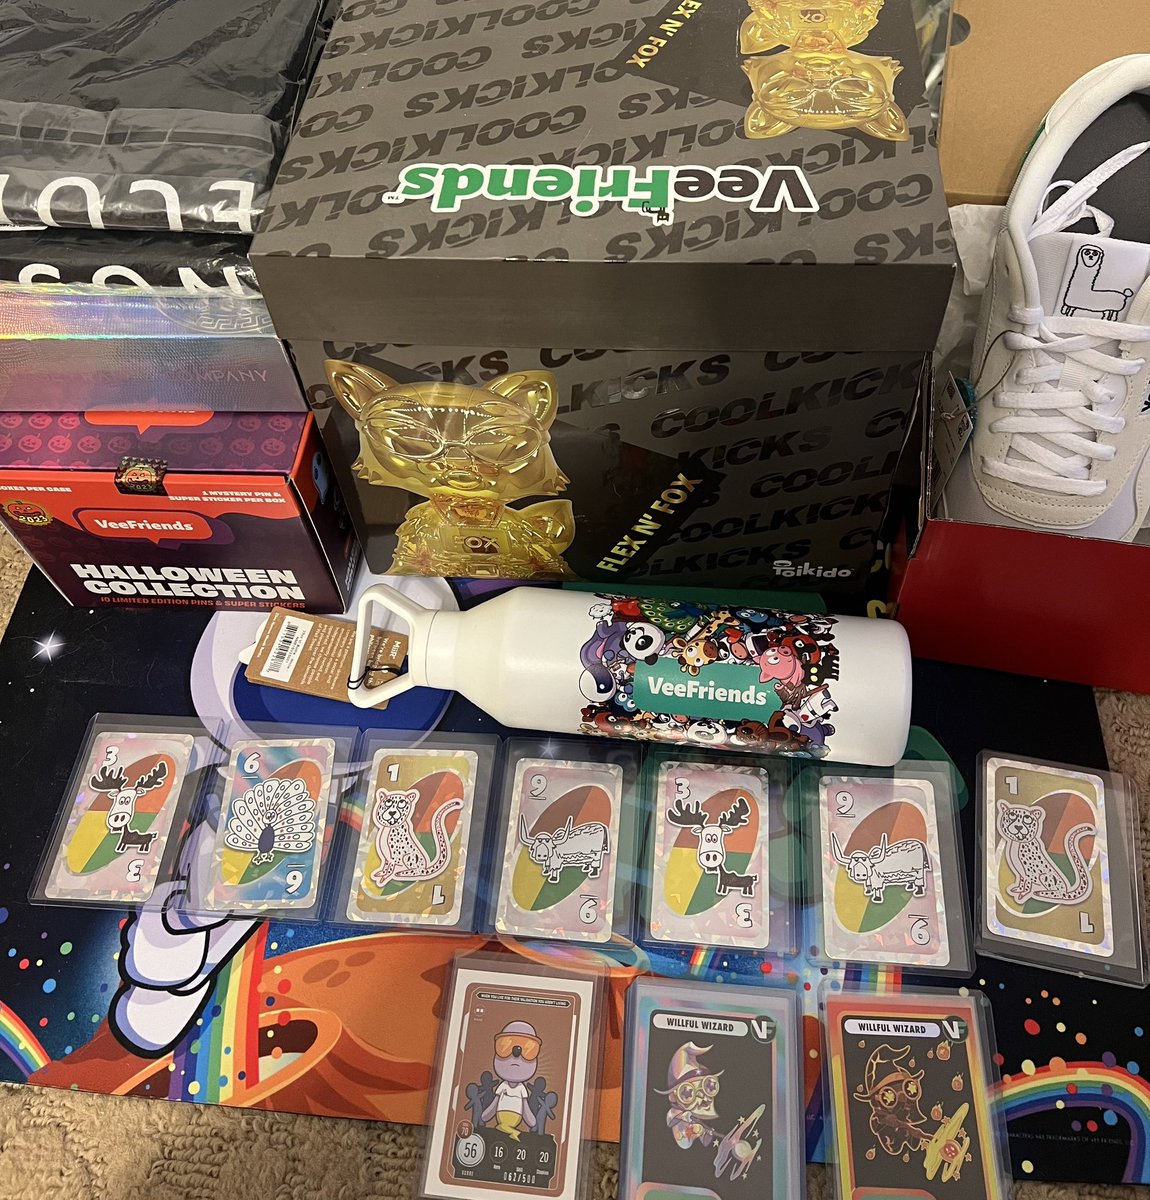 Let me know what you want! I can ship out tmw! 💀@veefriends Flexin fox gold figurine $200 Veefriends veecon water bottle $75 VFC Flamingo sunglasses $75 Sealed Halloween pin/sticker case$300 2 size 11 Alpaca Reebok shoes $55 each Uno cards lot of 7 $40 Very rare “live